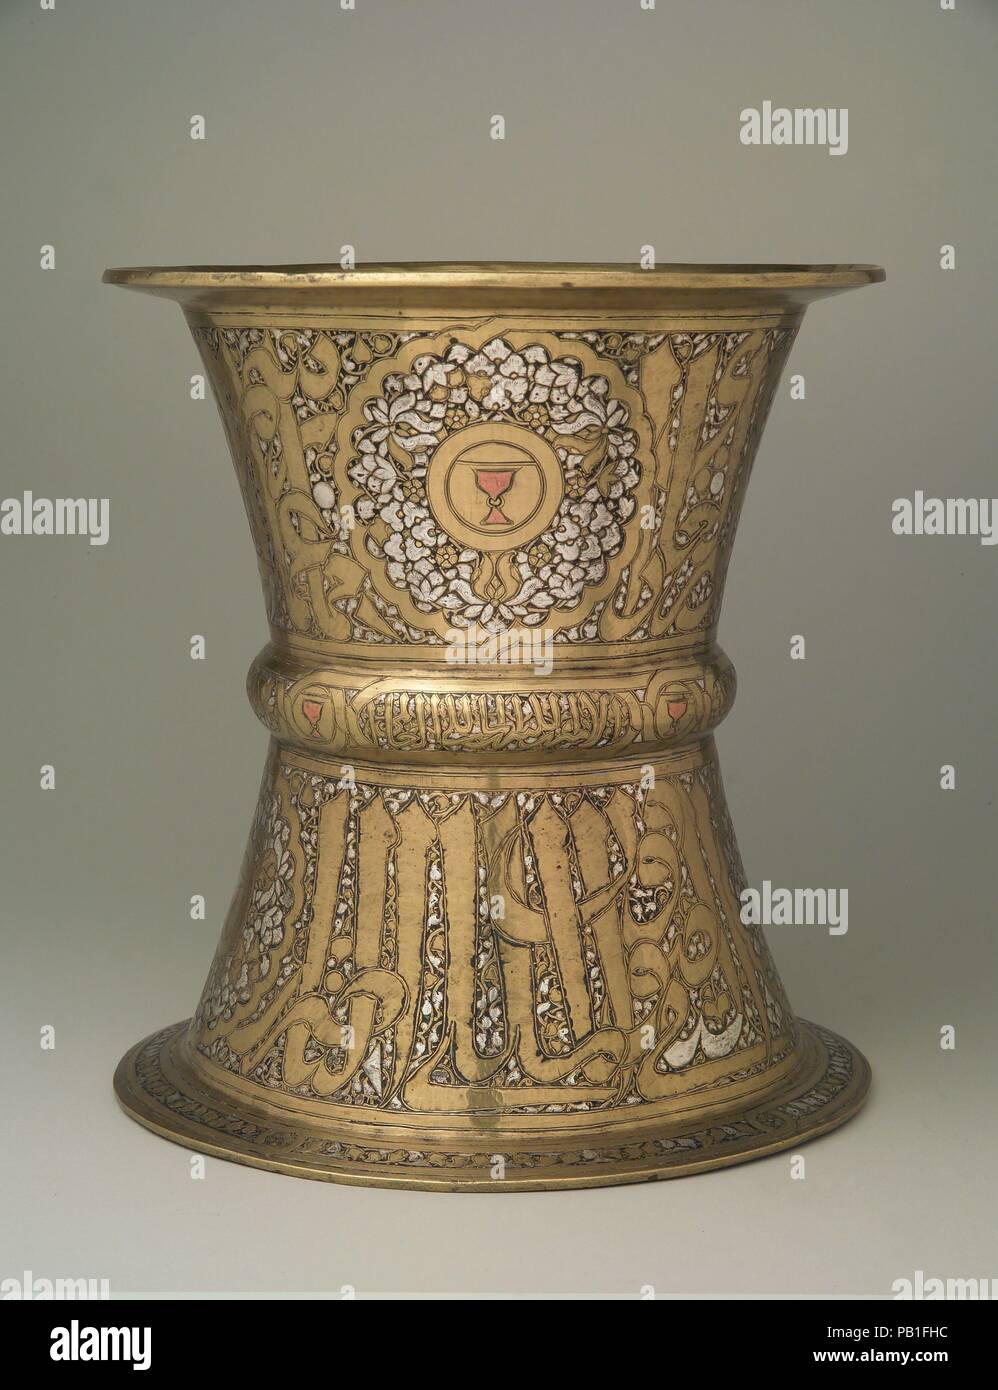 Tray Stand. Dimensions: H. 10 1/4 in. (26.0 cm)  D. 9 5/8 in. (24.4 cm). Date: mid-14th century.  Similar stands were widely employed in the Mamluk period to host large rounded metal trays (such as 91.1.604), on which fruits and other food were displayed.  The cup motif inlaid with copper stands out among the richly decoration of this tray. It was a blazon of the cupbearer, one of the differentiated offices of the court of the Mamluk sultans. The inscription reads Husain, son of Qawsun, who was cupbearer to Muhammad b. Qalawun (al-Malik al-Nasir) (1294-1340/41). Despite having been ousted afte Stock Photo